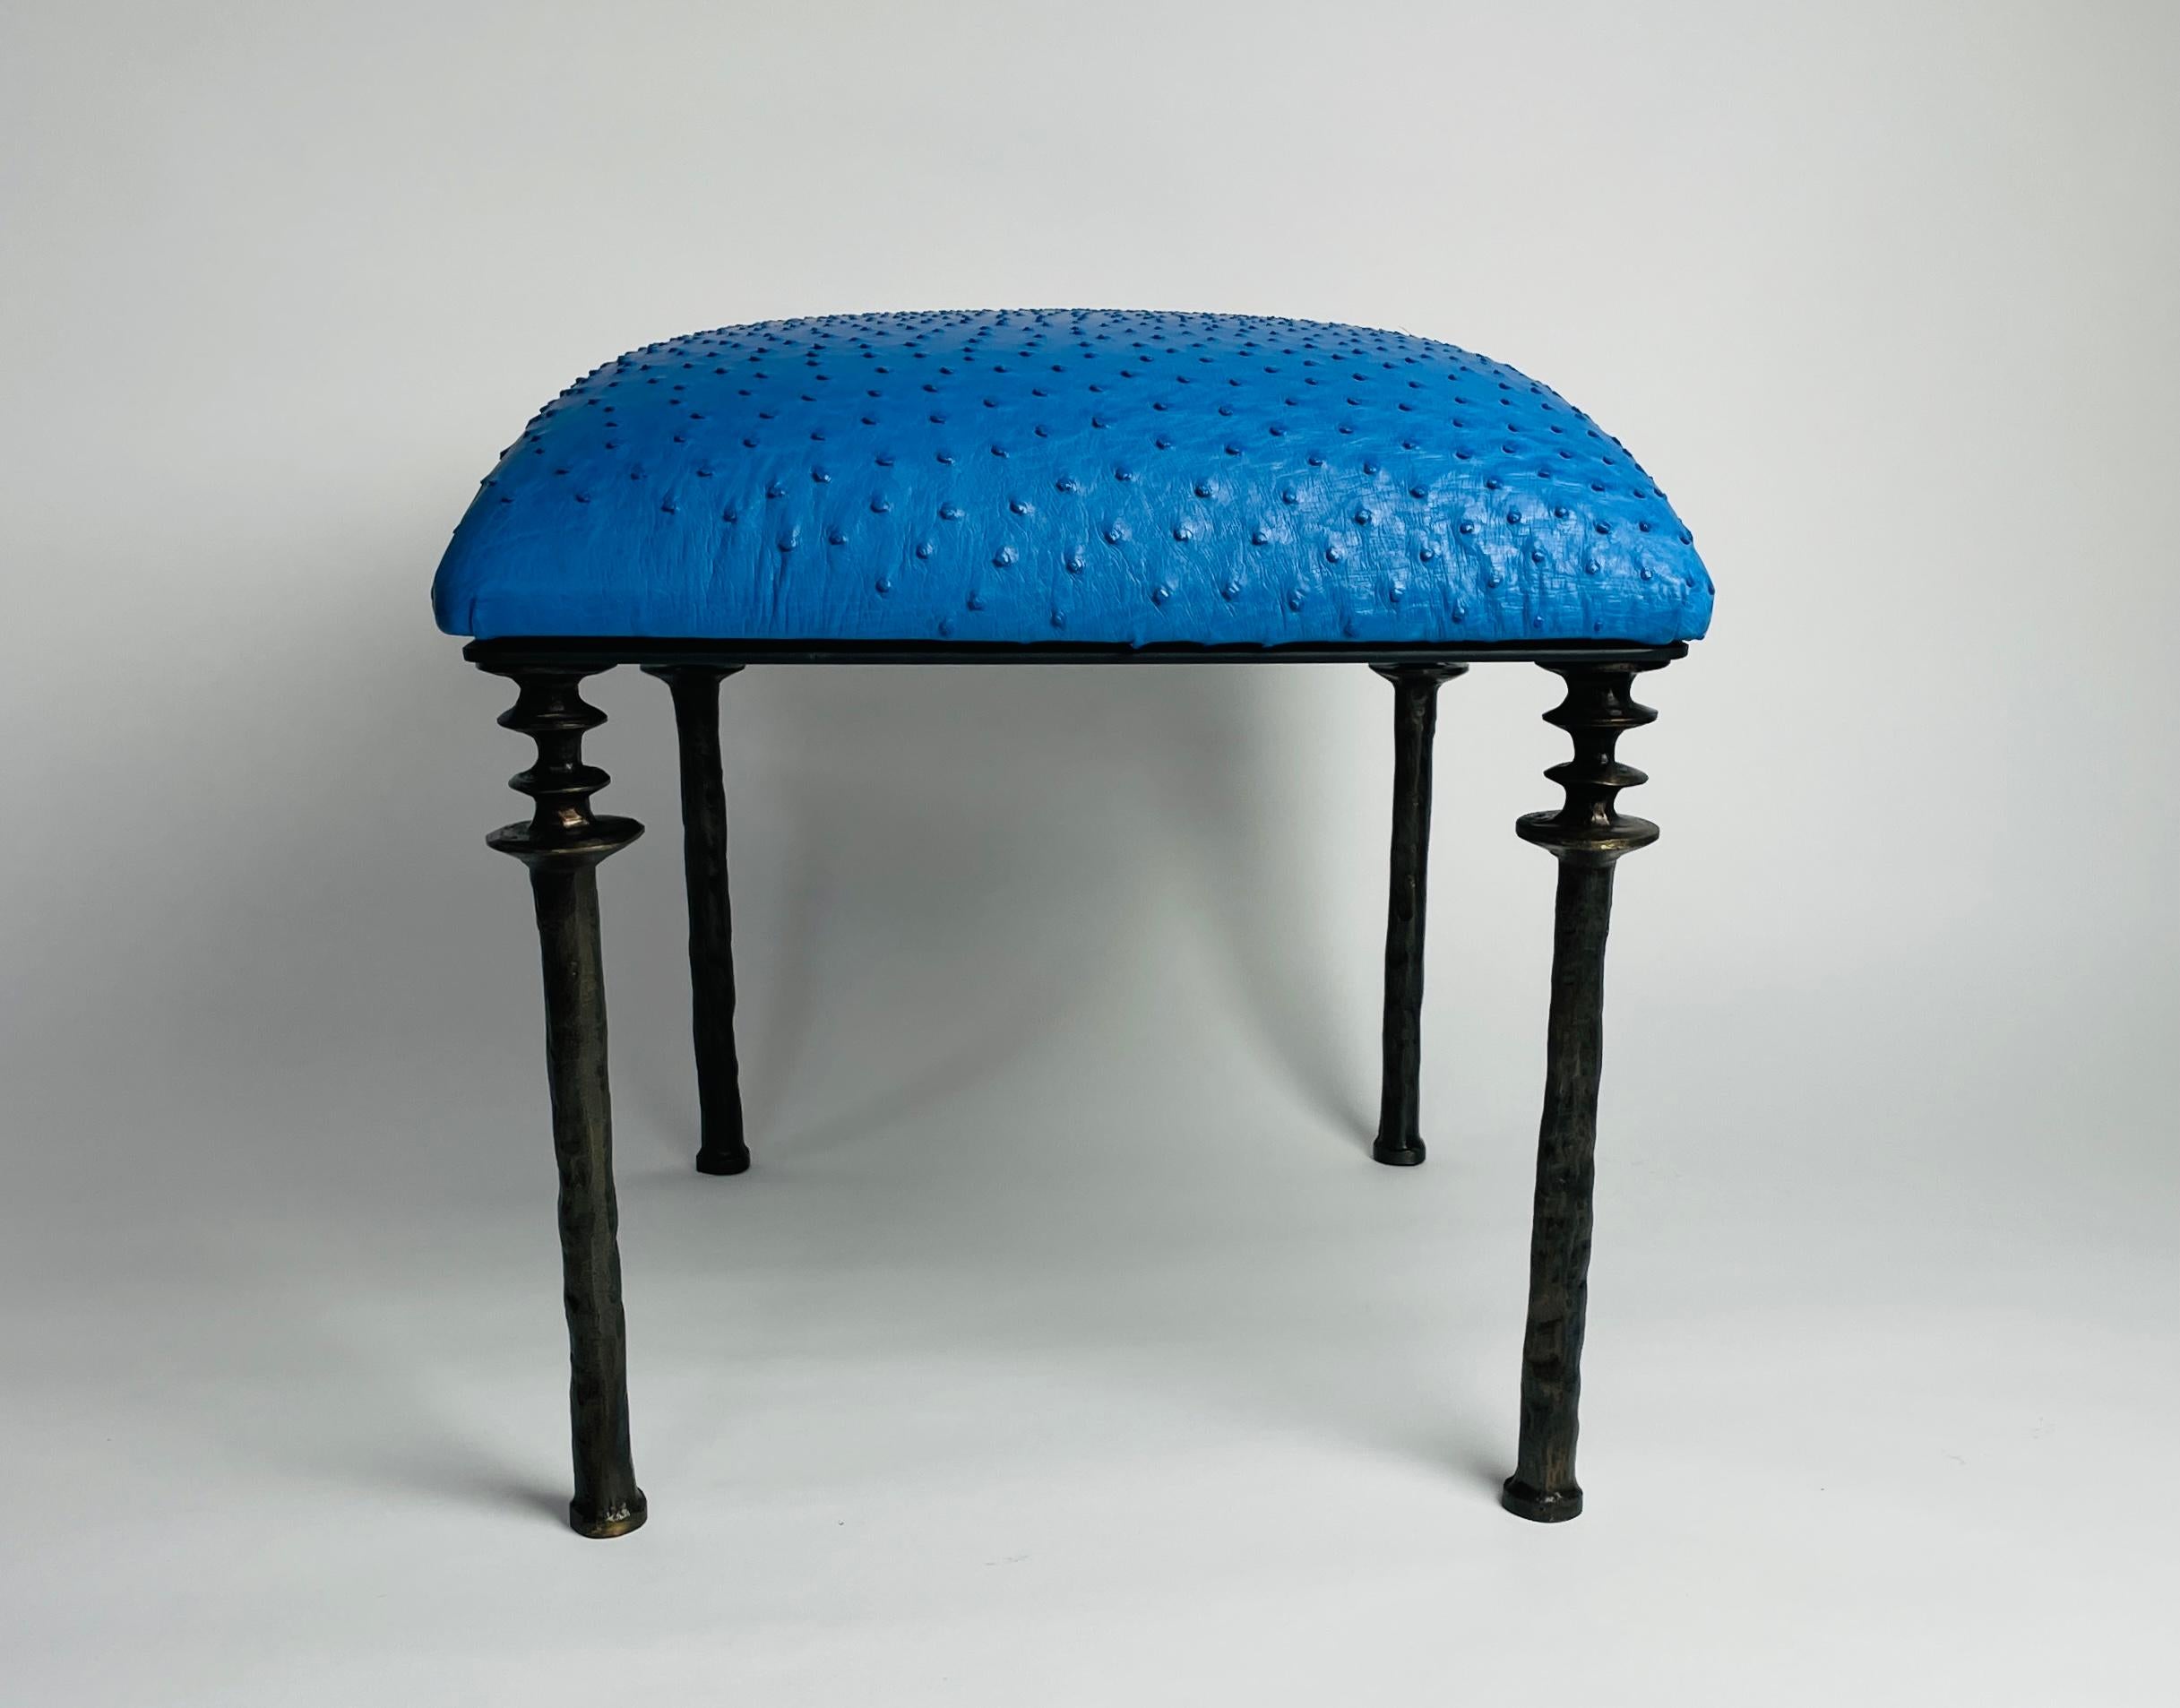 American Pair of Sorgue Stools, by Bourgeois Boheme Atelier, Blue Ostrich Leather For Sale